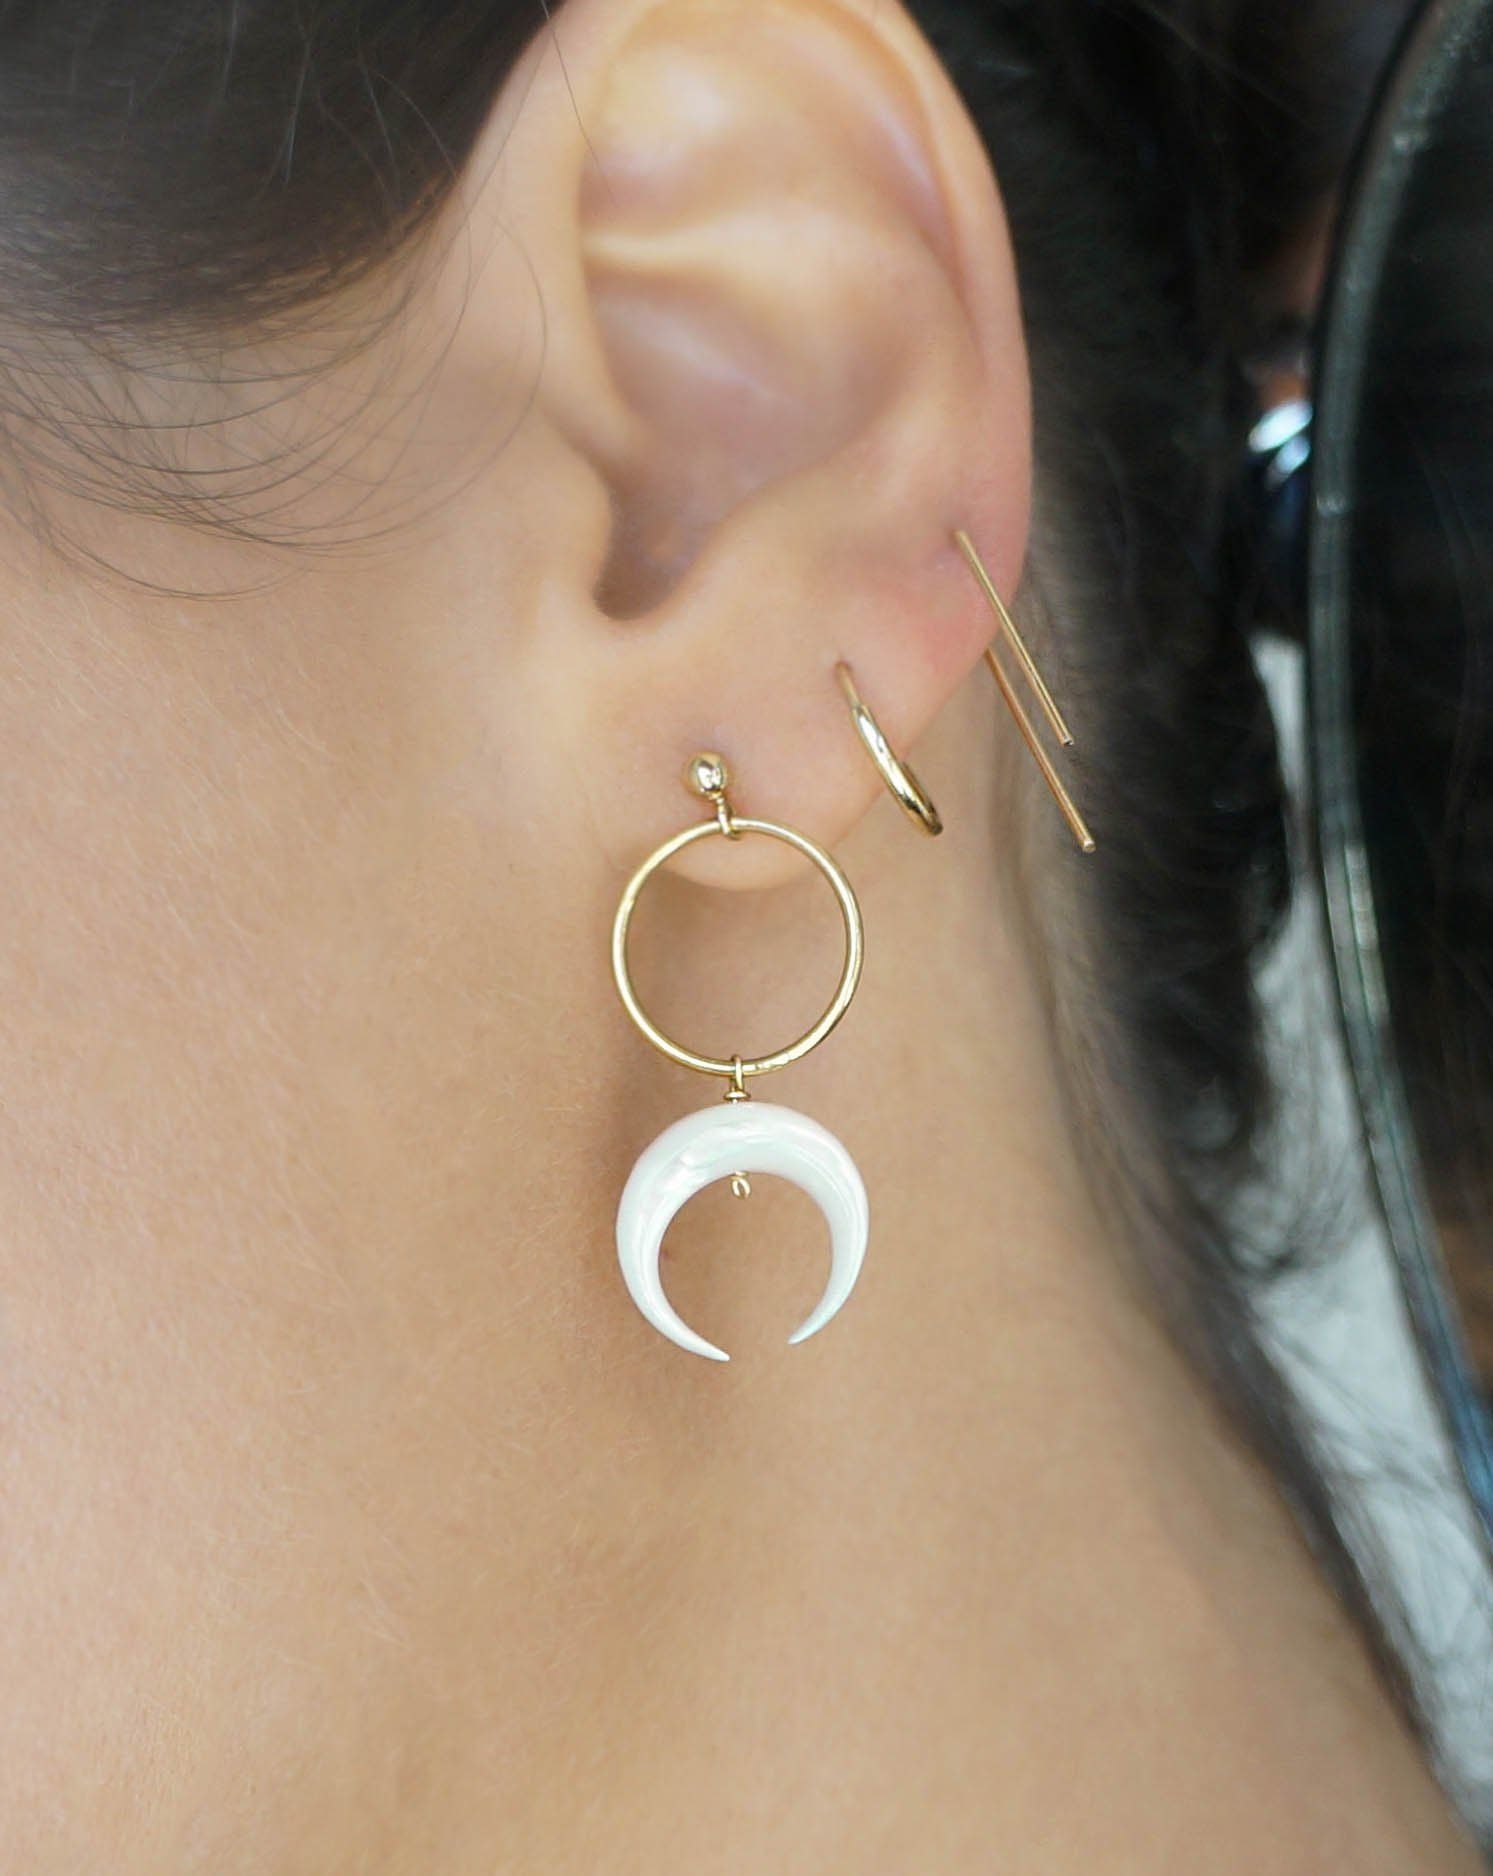 Baques Earrings by KOZAKH. Dangling earrings in 14K Gold Filled, featuring a hand-carved Mother of Pearl moon charm.